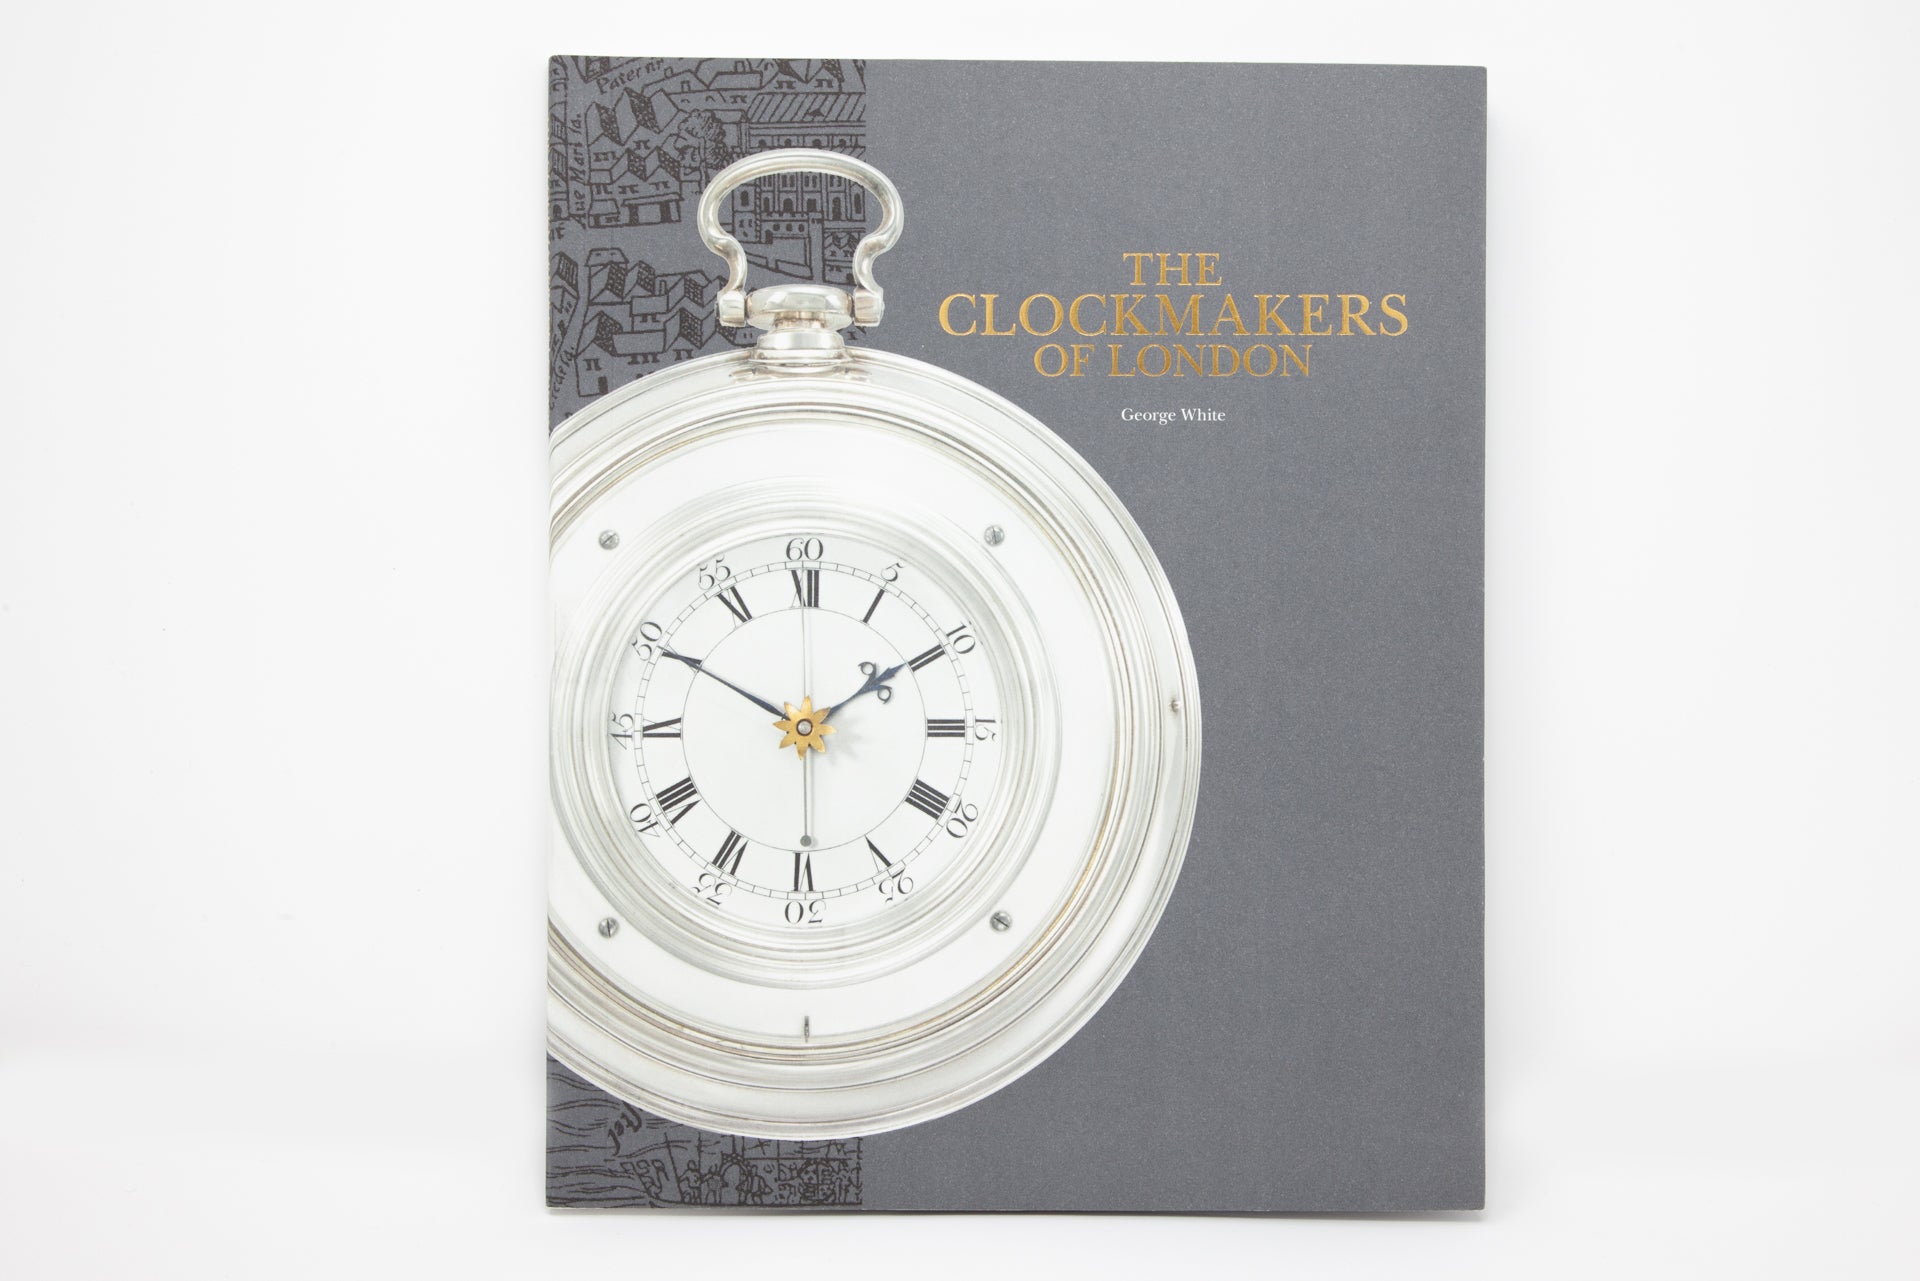 The Clockmakers of London: An account of the Worshipful Company of Clockmakers and its Collection